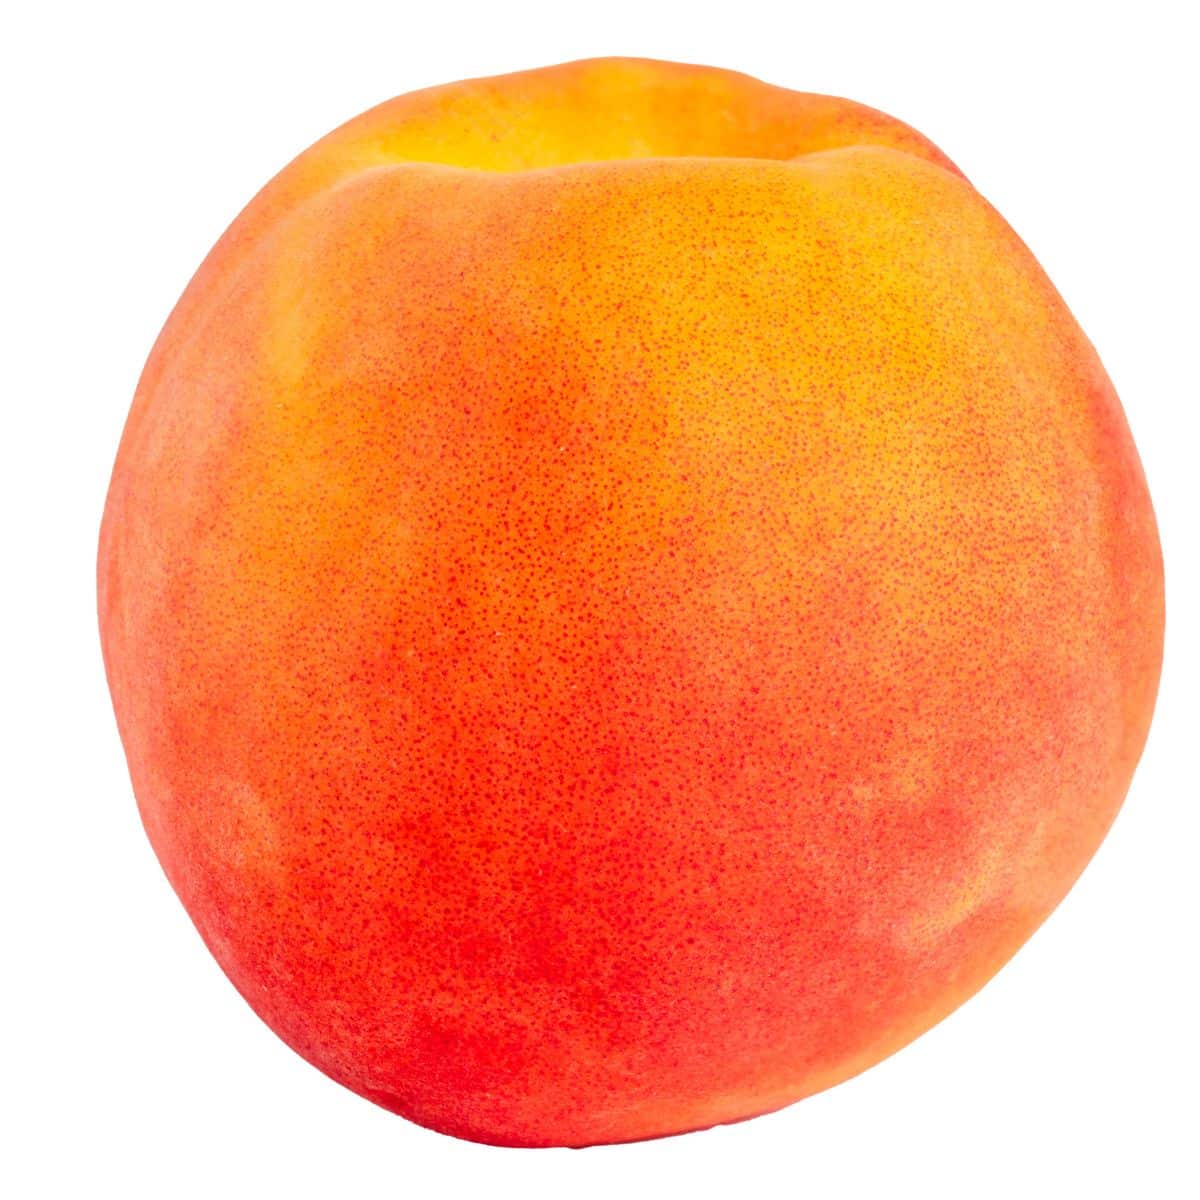 Babcock peach on a white background.